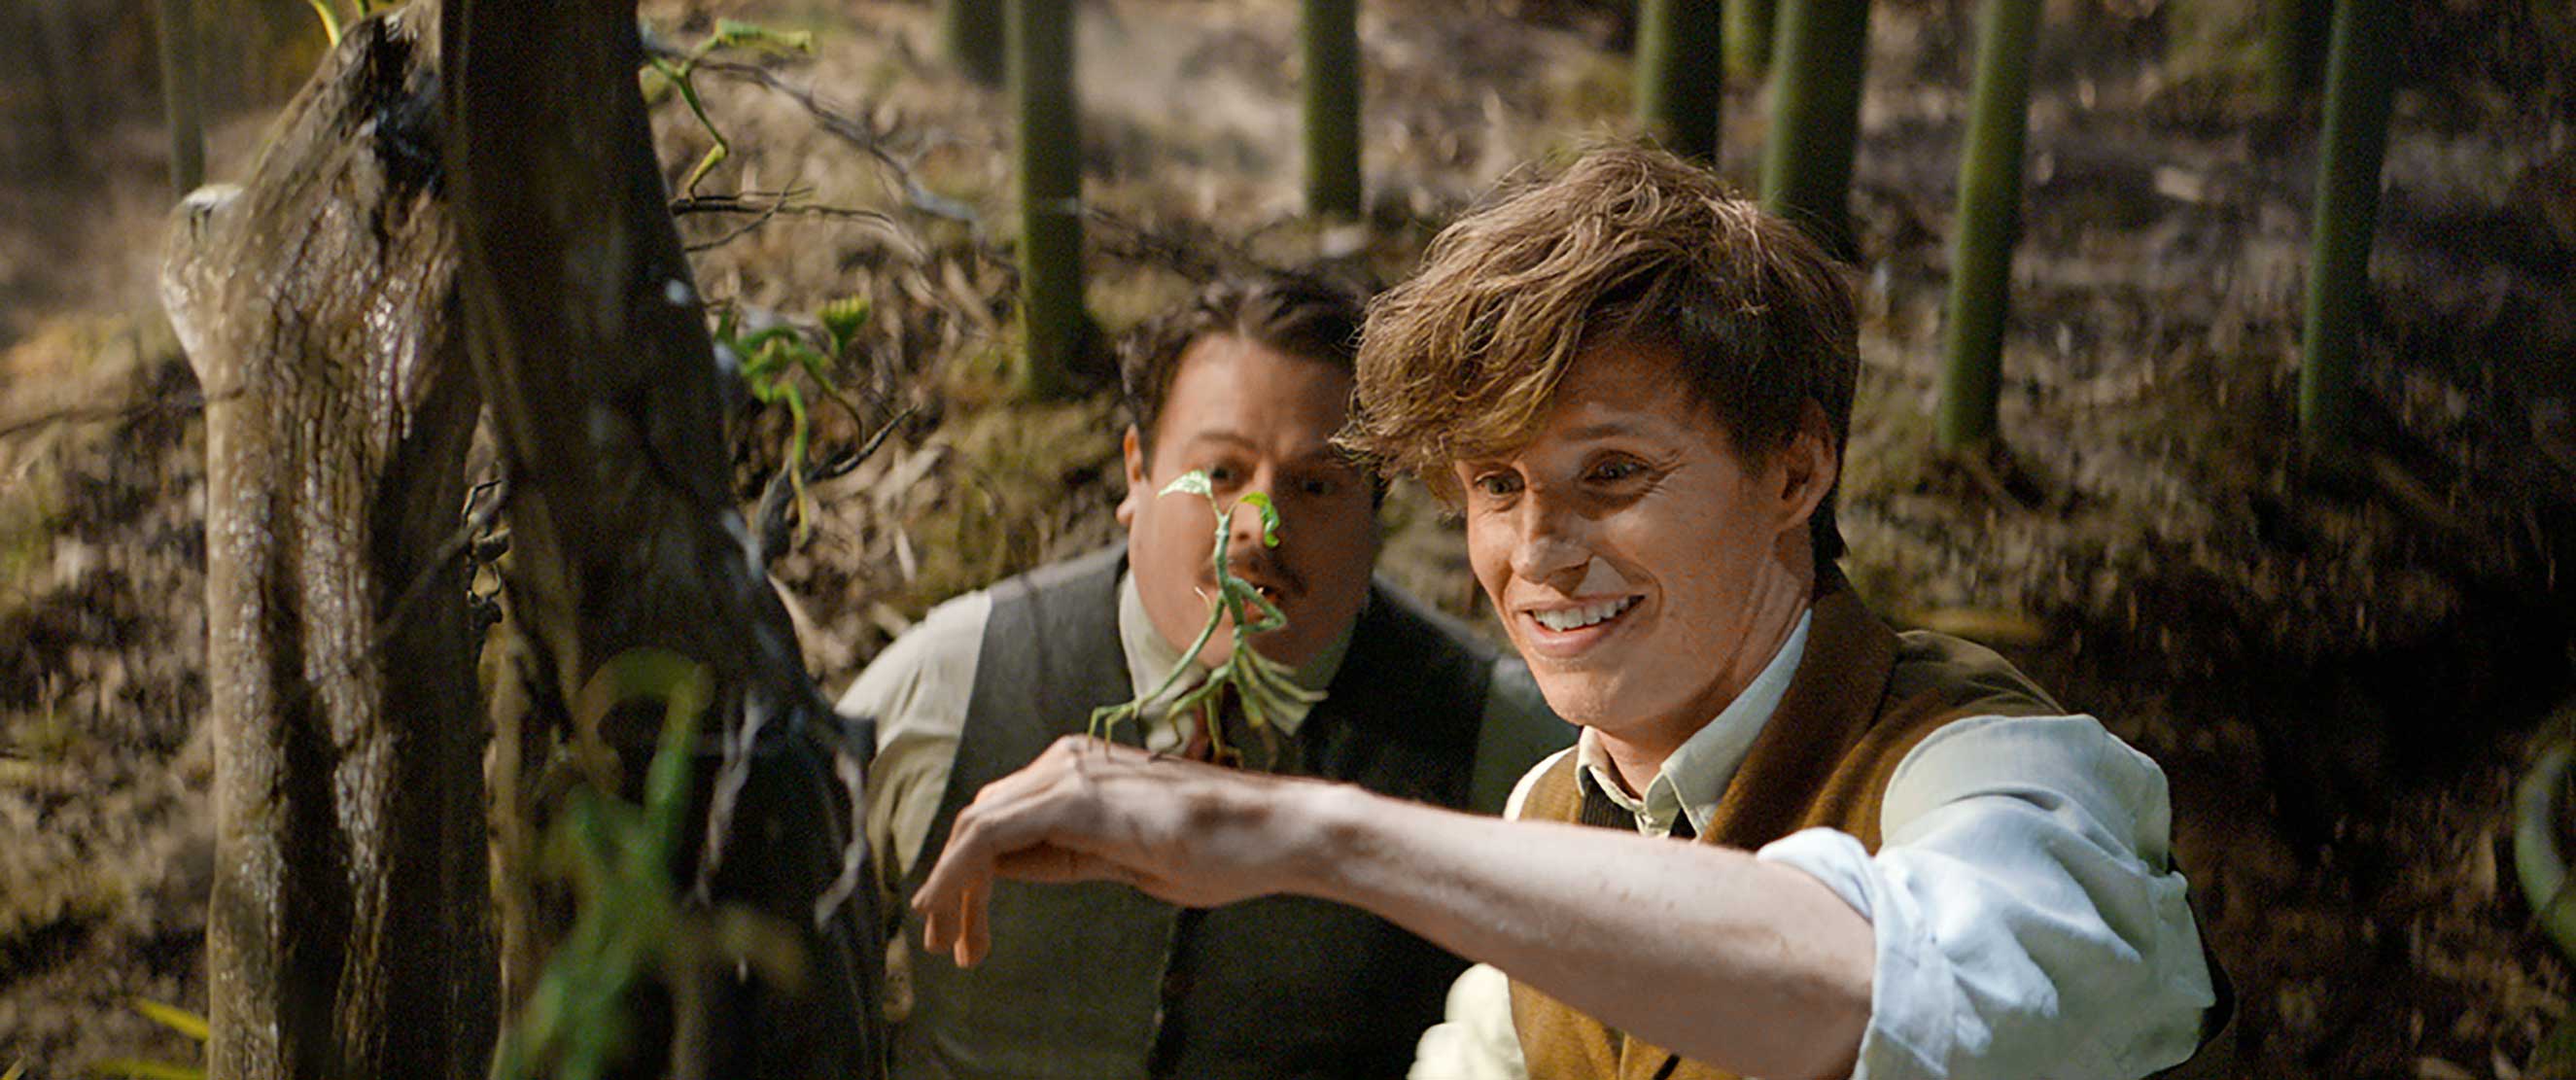 DAN FOGLER as Jacob, EDDIE REDMAYNE as Newt and a beast called a Bowtruckle in Warner Bros. Pictures’ fantasy adventure “FANTASTIC BEASTS AND WHERE TO FIND THEM” (Warner Bros)